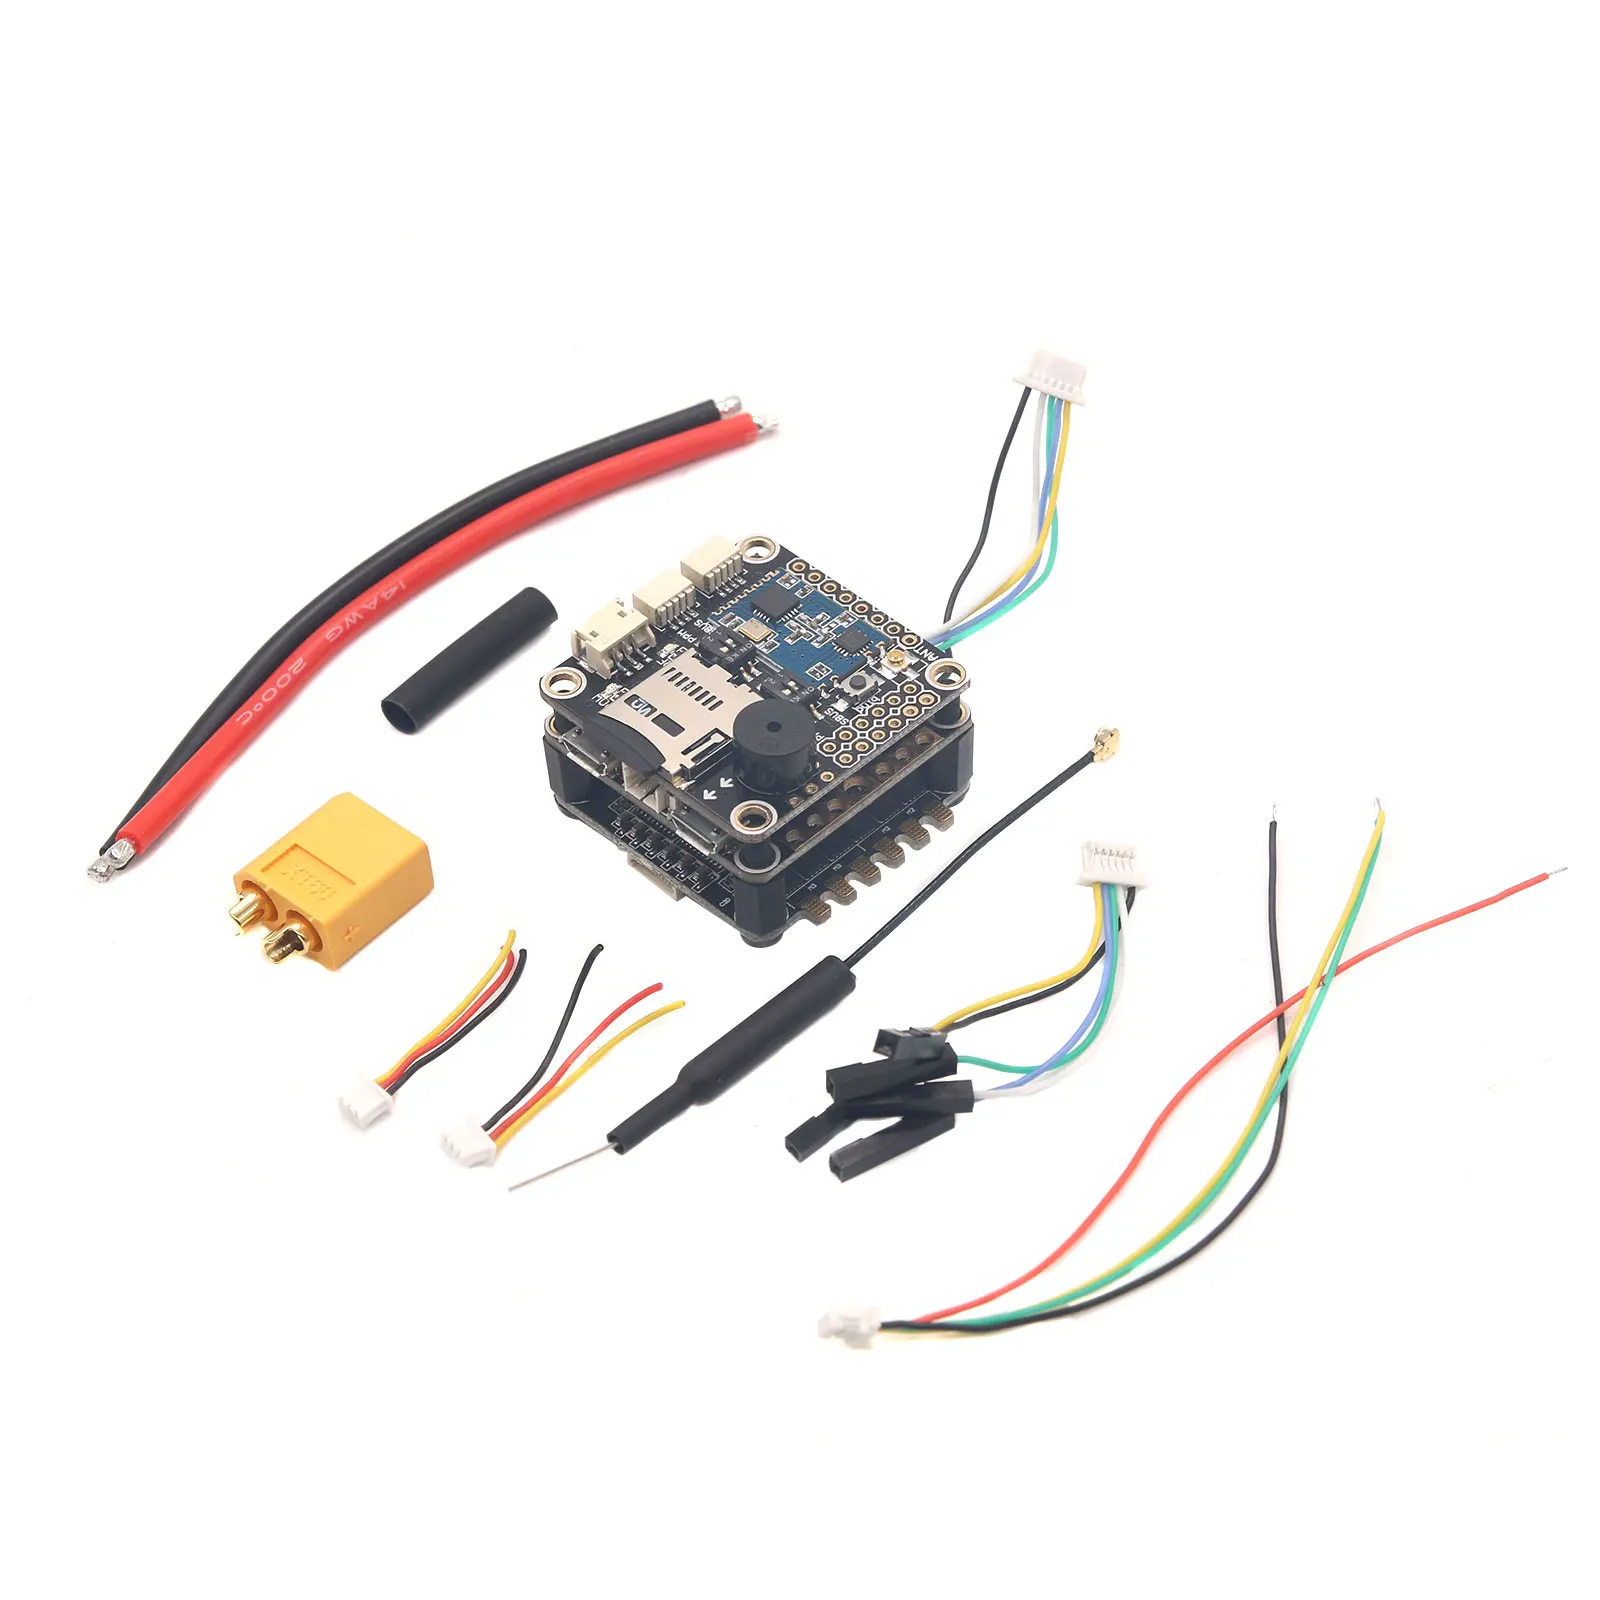 

F3 EVO Flight Controller 4in1 20A ESC Frsky 8CH PPM SBUS Receiver MWOSD with PDB for FPV Drone Quadcopter